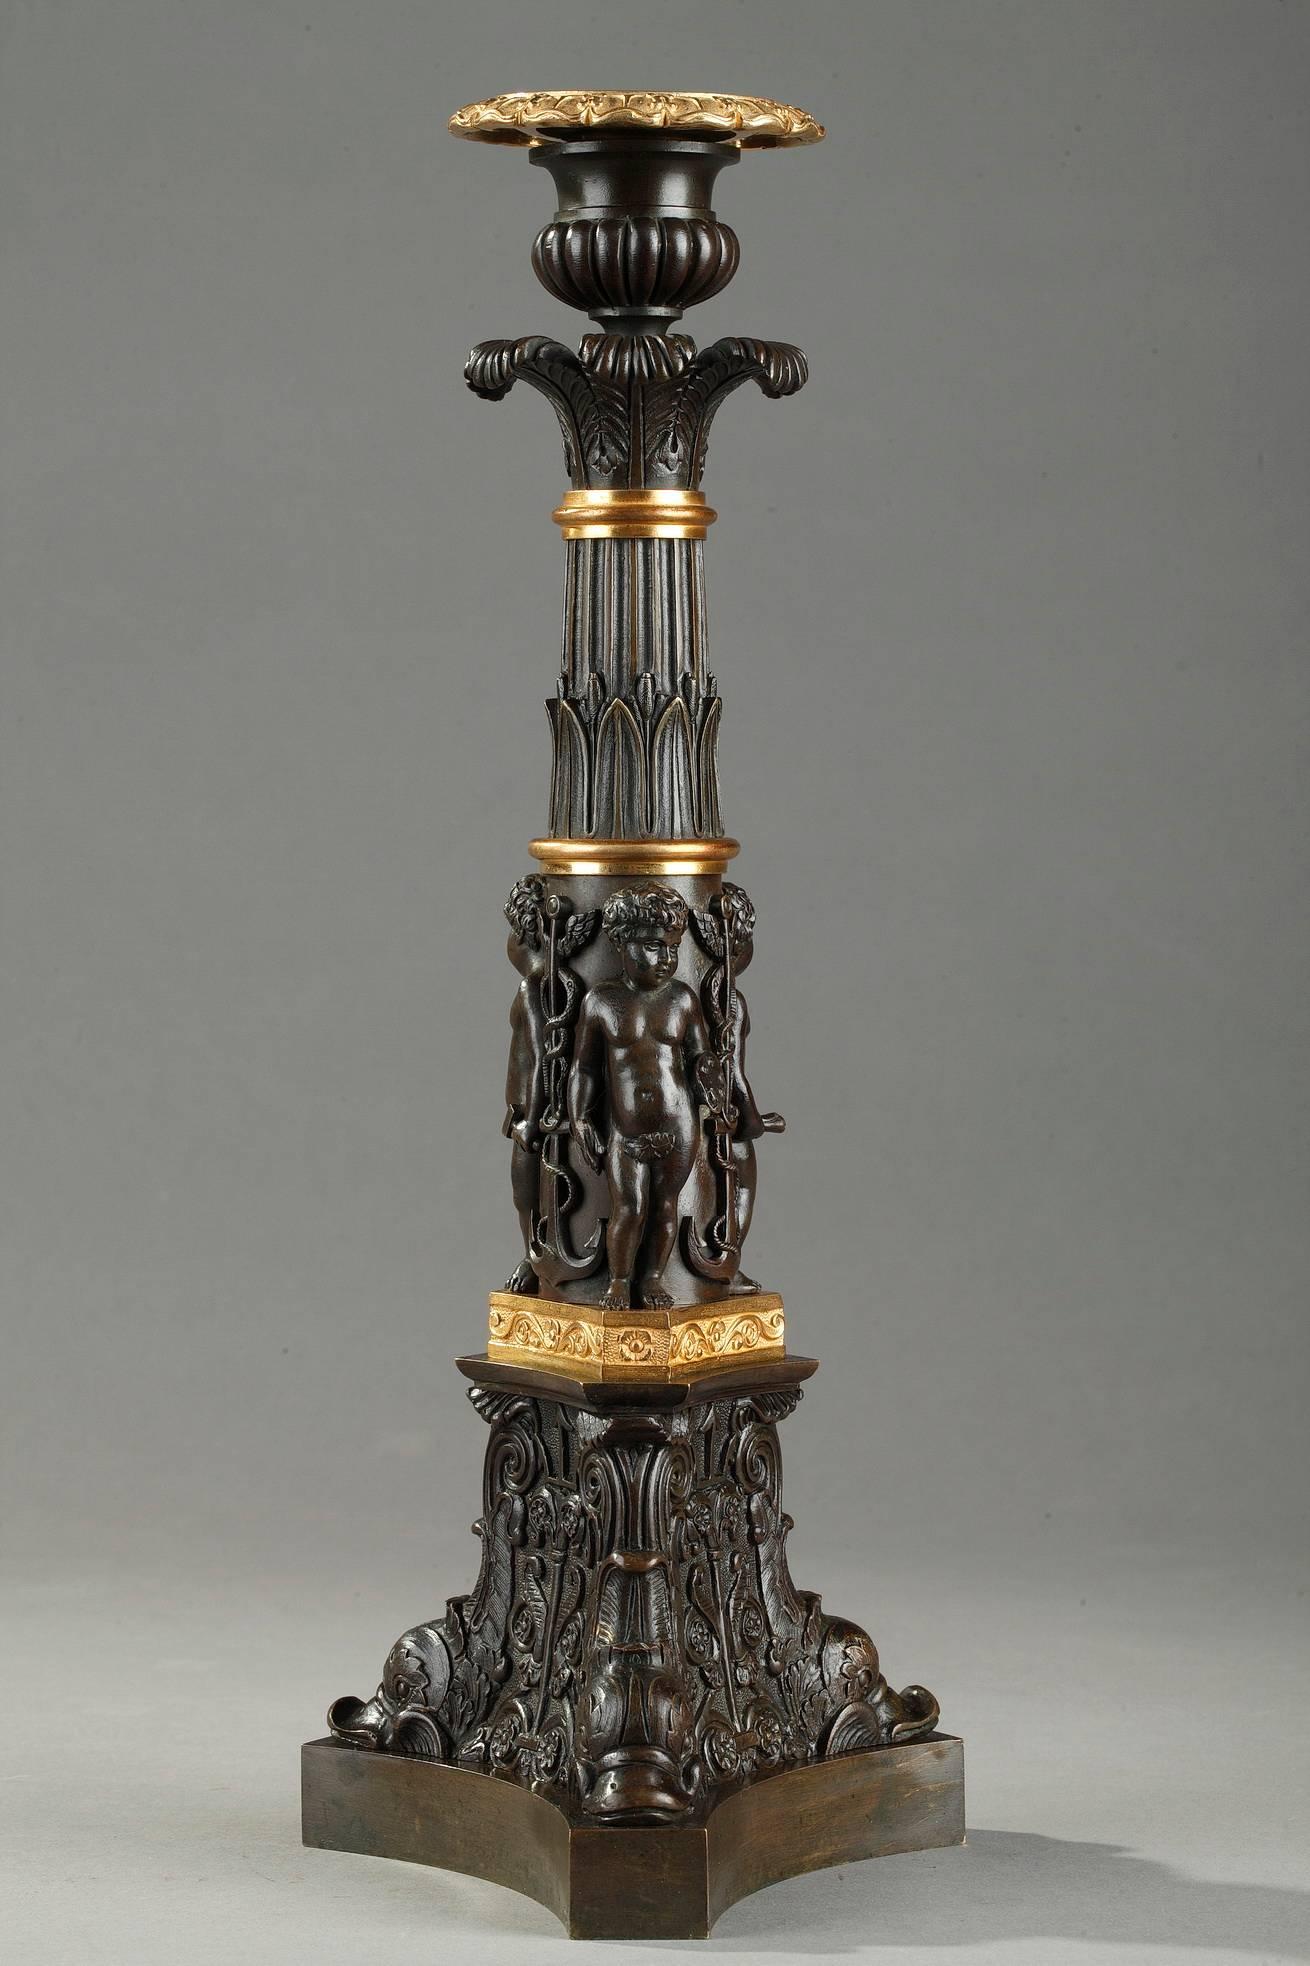 Large 19th century restauration candlesticks in ormolu and patinated bronze. The barrel is divided into three registers separated by gilt bronze rings. The pair features young cupids symbolizing the arts (painting, music and sculpture). The upper